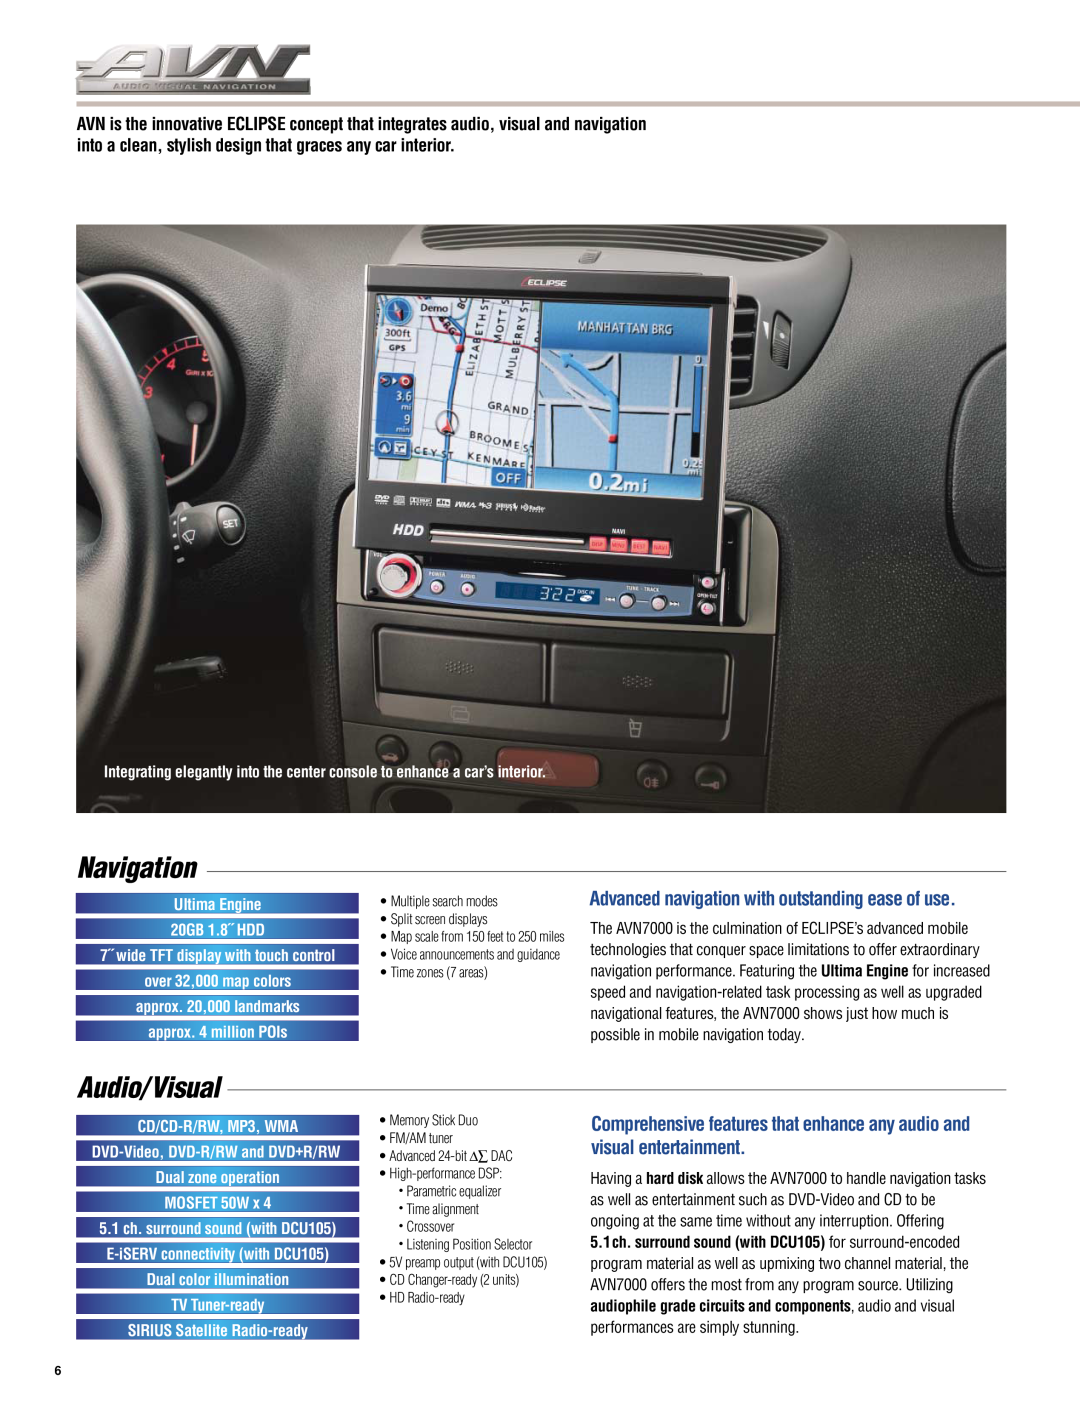 Eclipse - Fujitsu Ten HDR105, AVX5000, AVN5495 Advanced navigation with outstanding ease of use, Navigation, Audio/Visual 